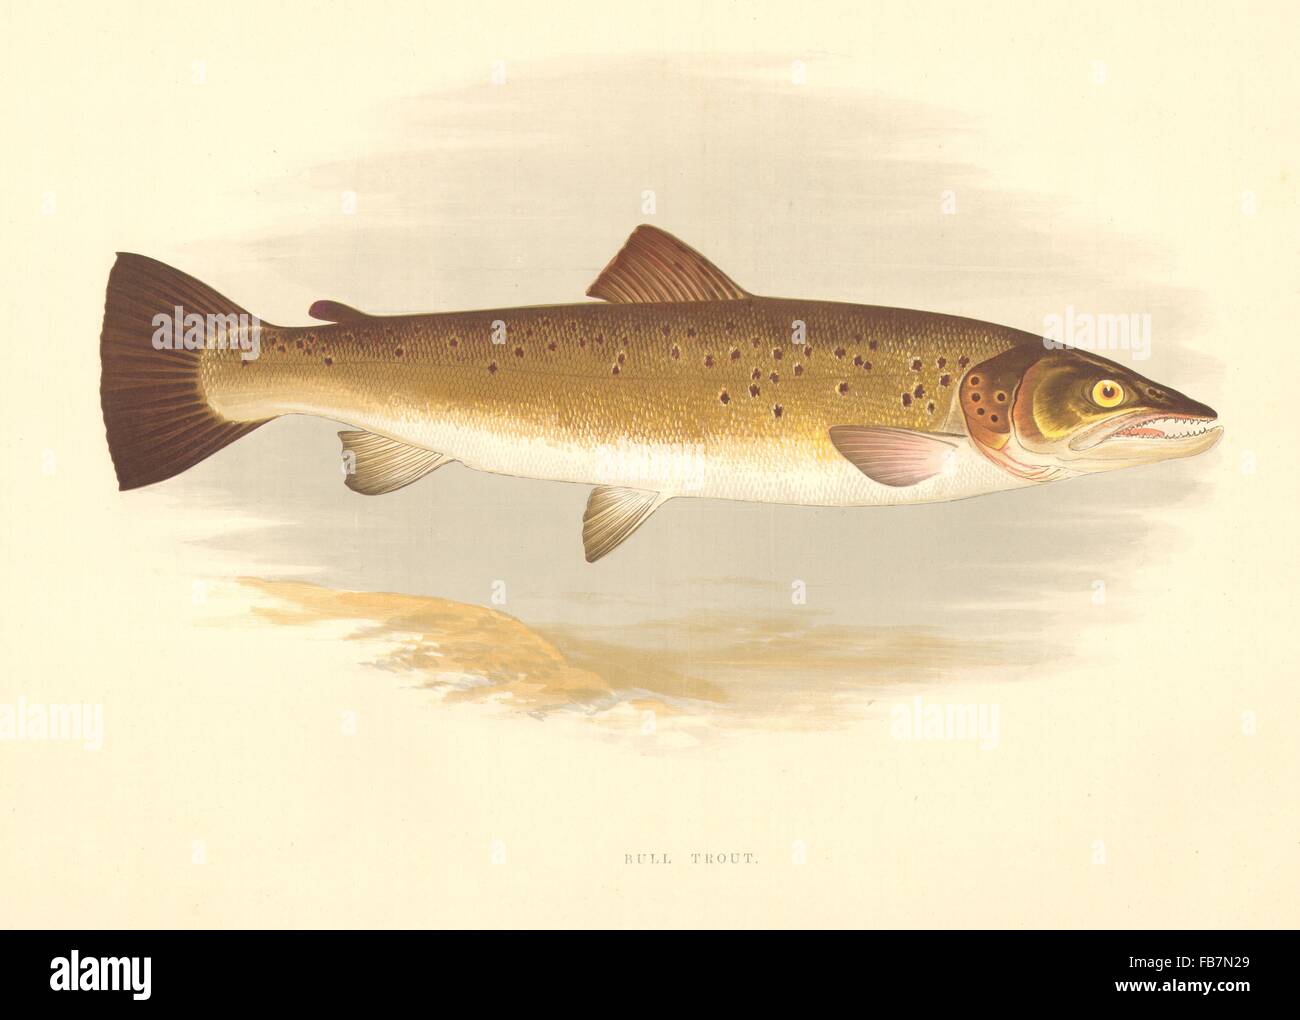 FRESHWATER FISH: Bull Trout (Salmo eriox) - Houghton / Lydon, old print 1879 Stock Photo